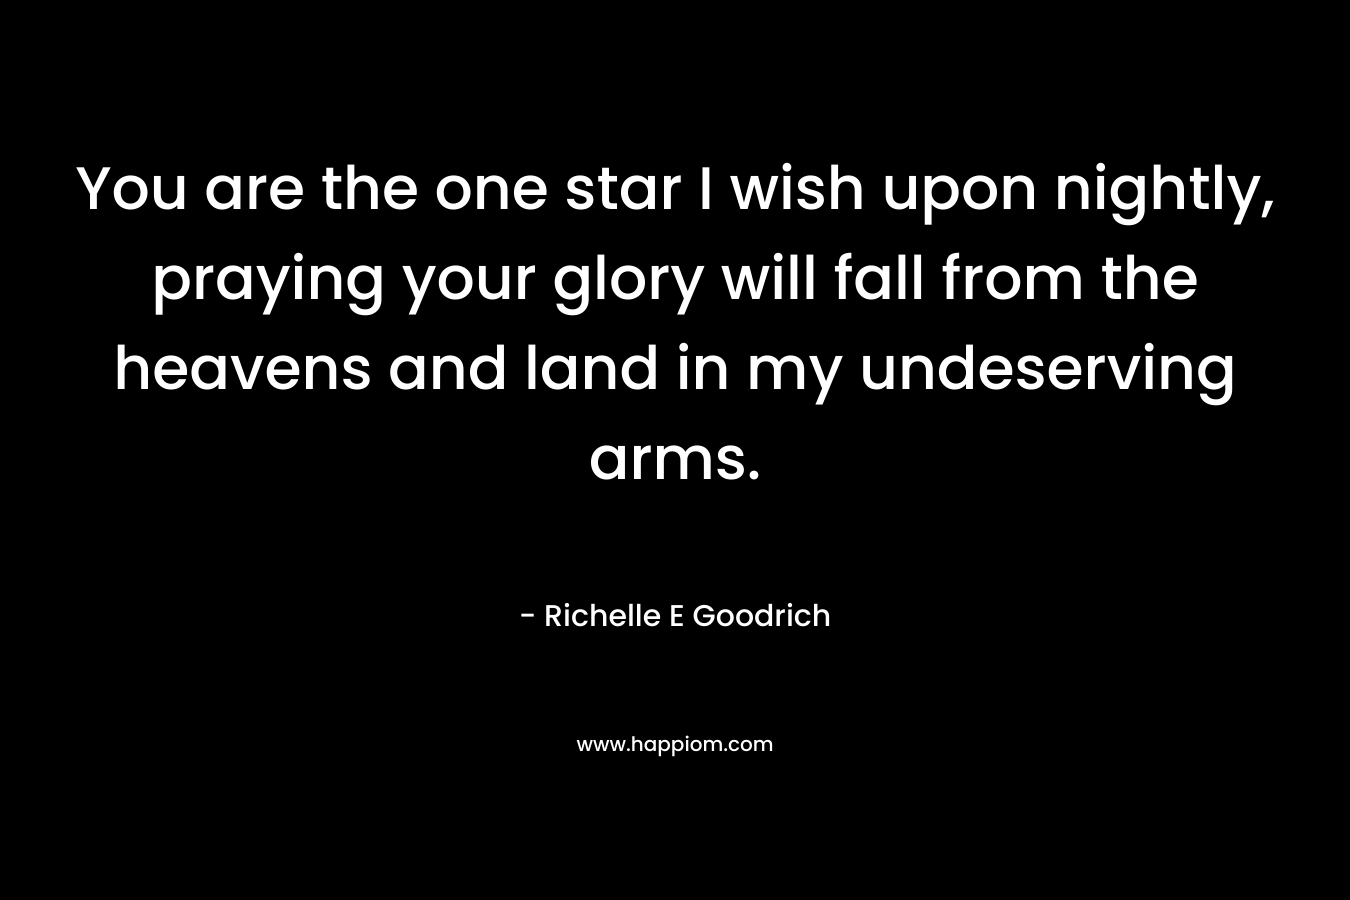 You are the one star I wish upon nightly, praying your glory will fall from the heavens and land in my undeserving arms. – Richelle E Goodrich